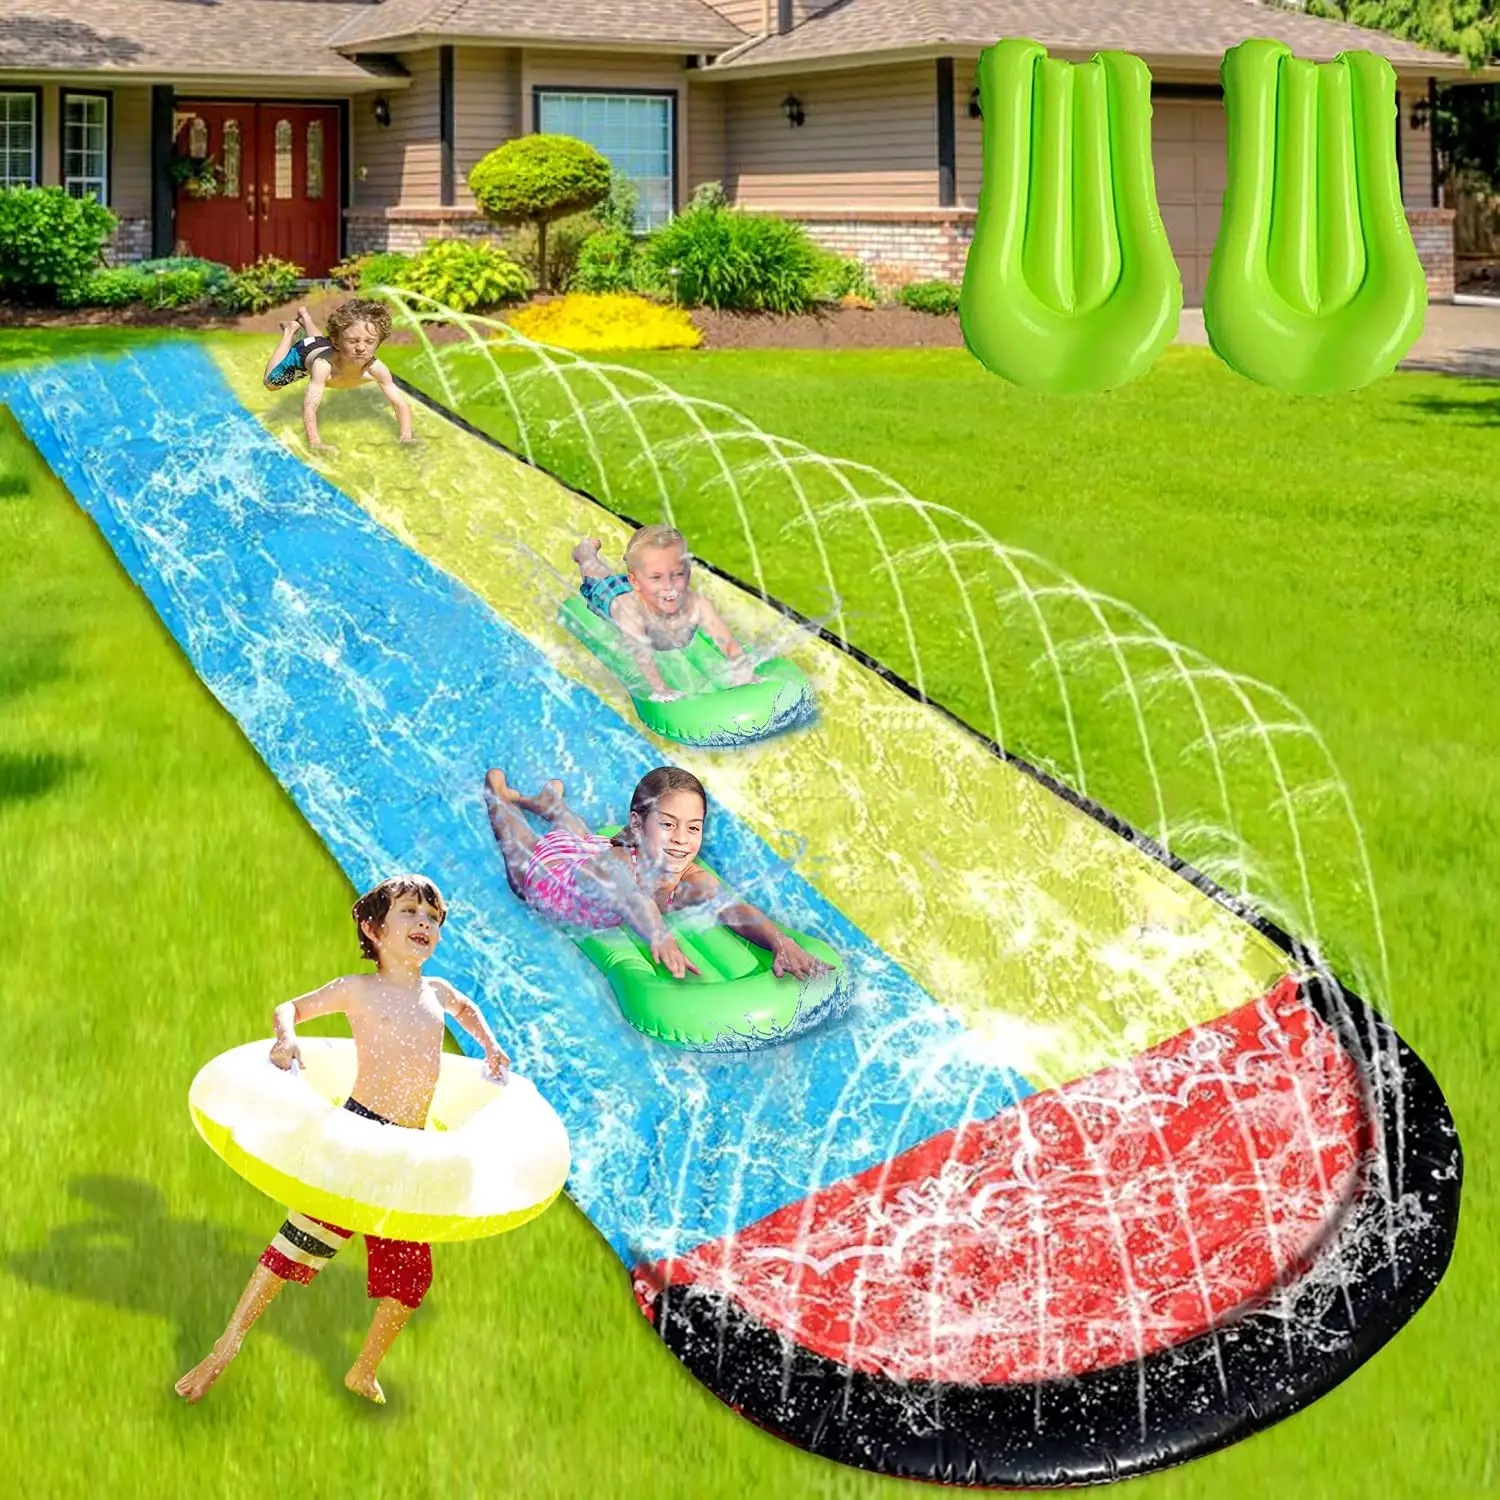 16' Foot 2 Sliding Racing Lanes with Sprinklers Lawn Water Slides for Kids PVC outdoor Backyard inflatable Water Slide